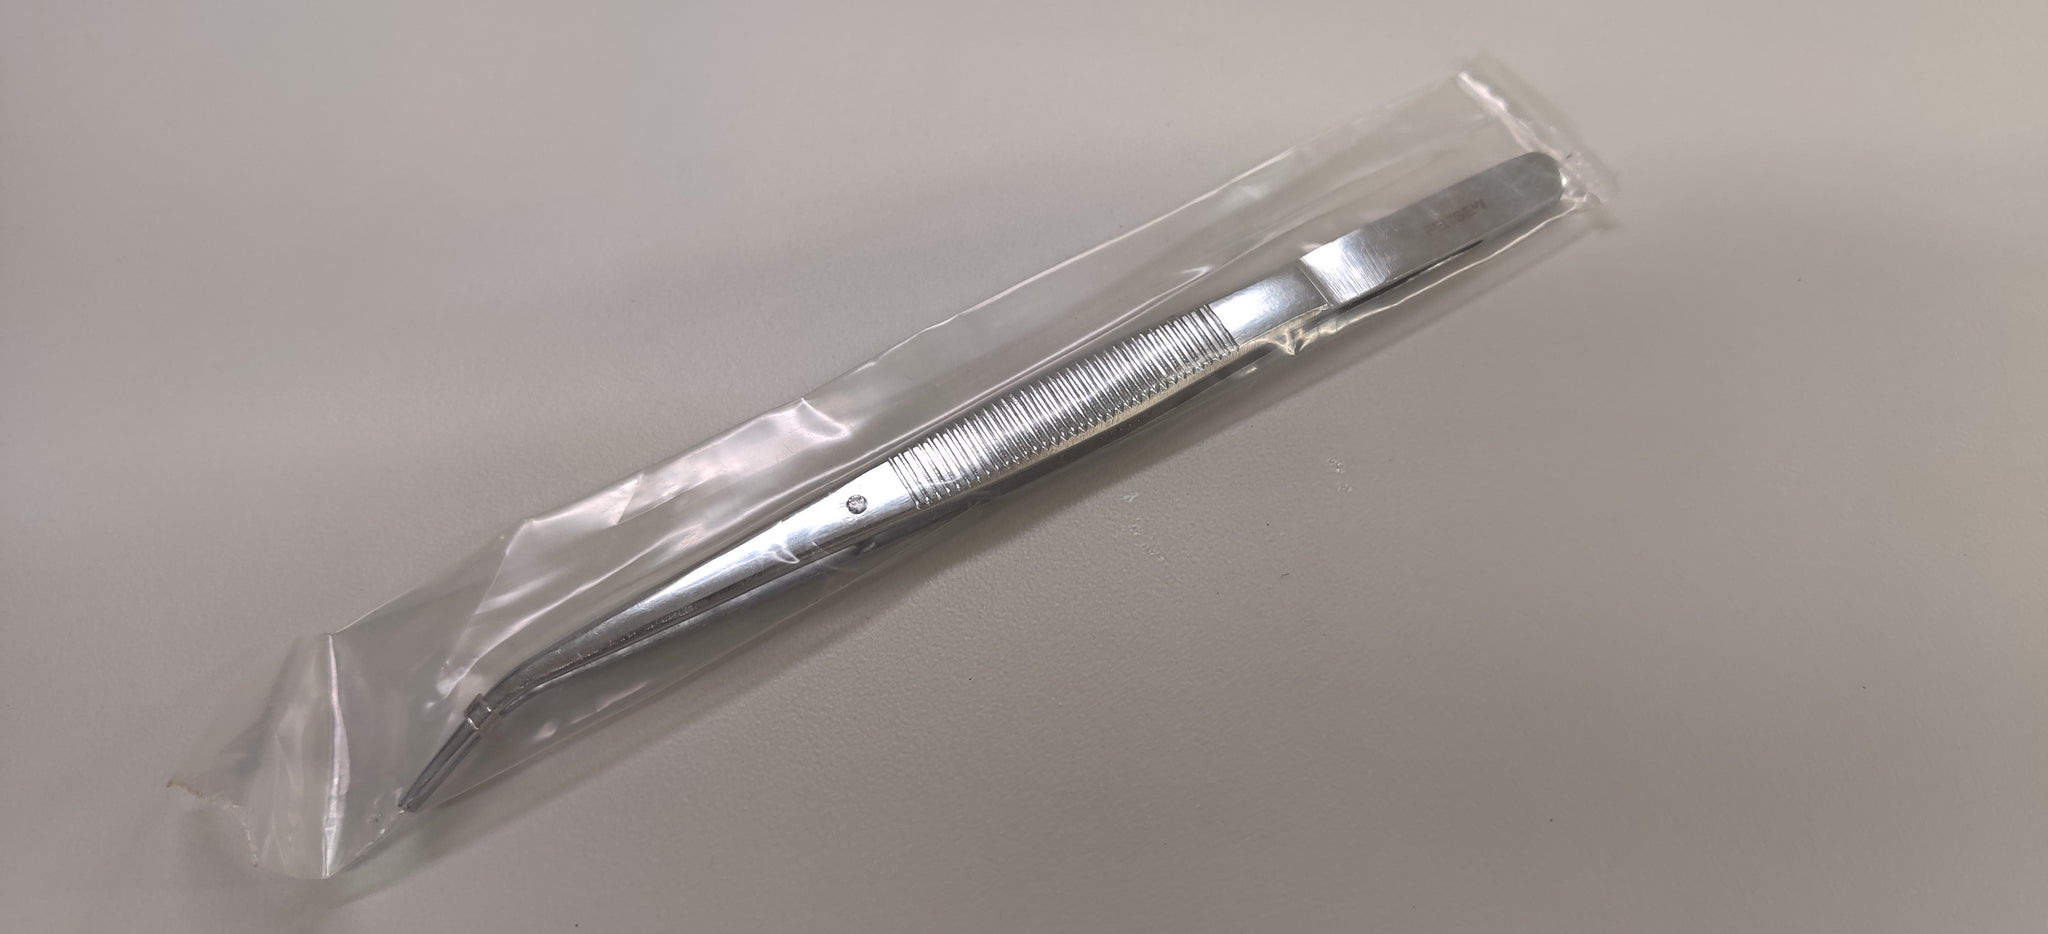 Straight-Nose Sewing Tweezers 6 – Cen Sewing Machine Company